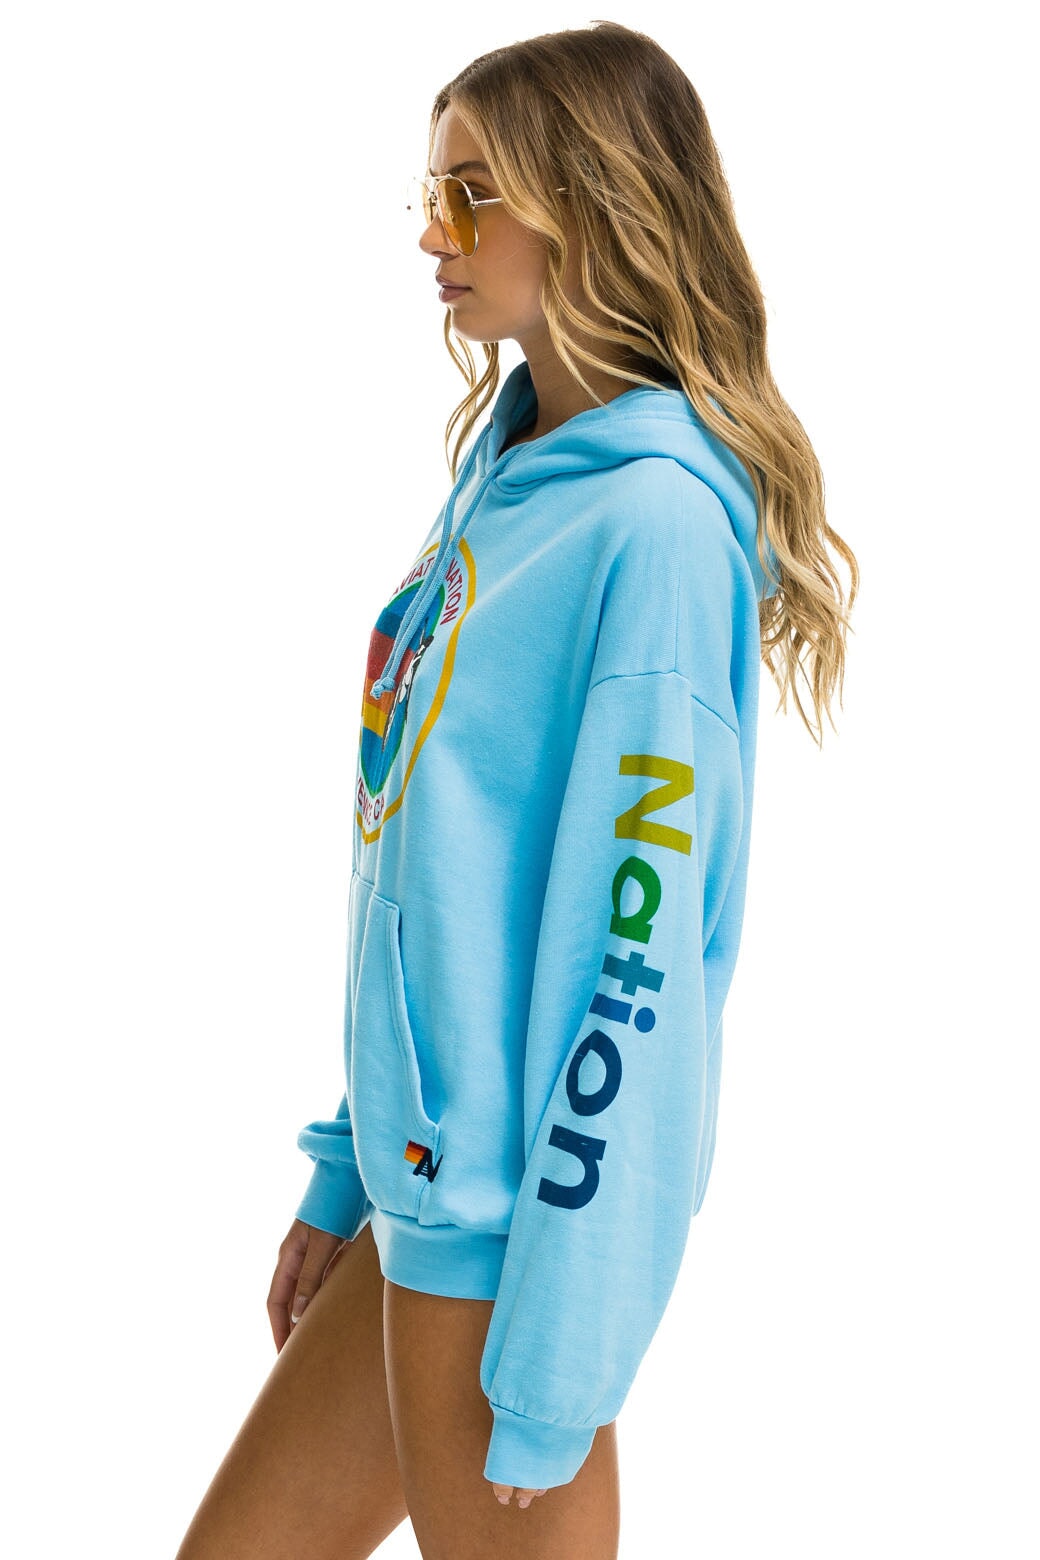 AVIATOR NATION RELAXED PULLOVER HOODIE - SKY Hoodie Aviator Nation 